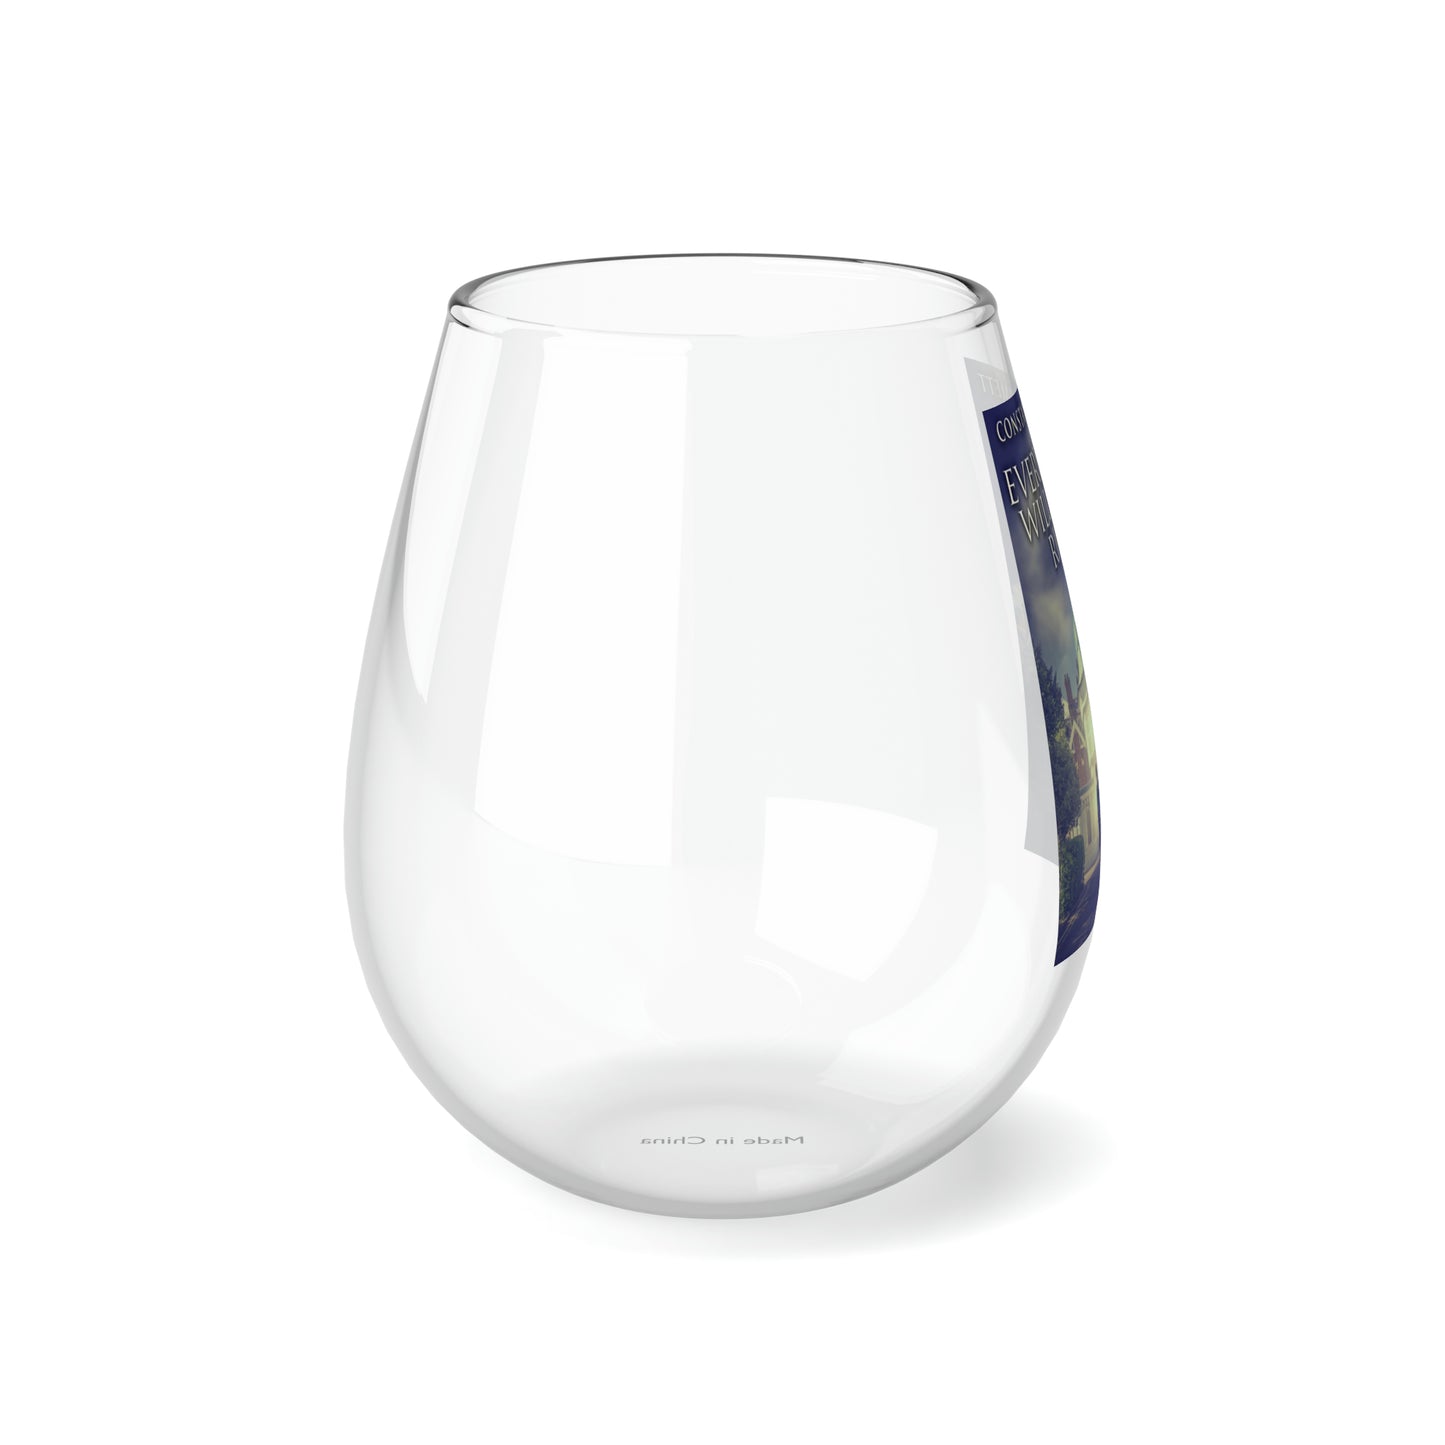 Everything Will Be All Right - Stemless Wine Glass, 11.75oz